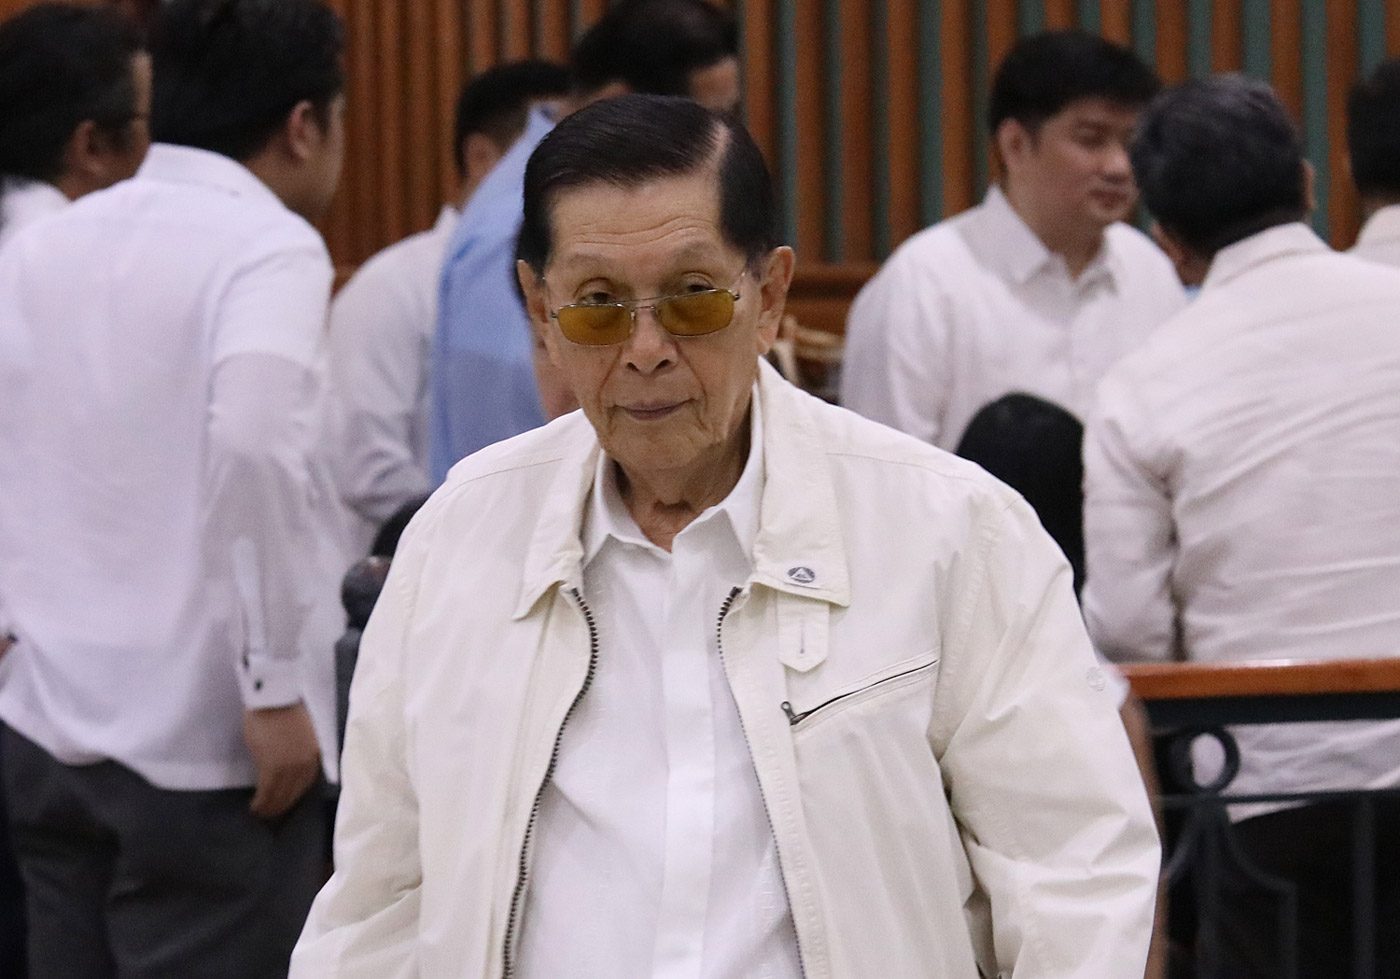 Sandiganbayan grants Enrile’s request to see documents on plunder case